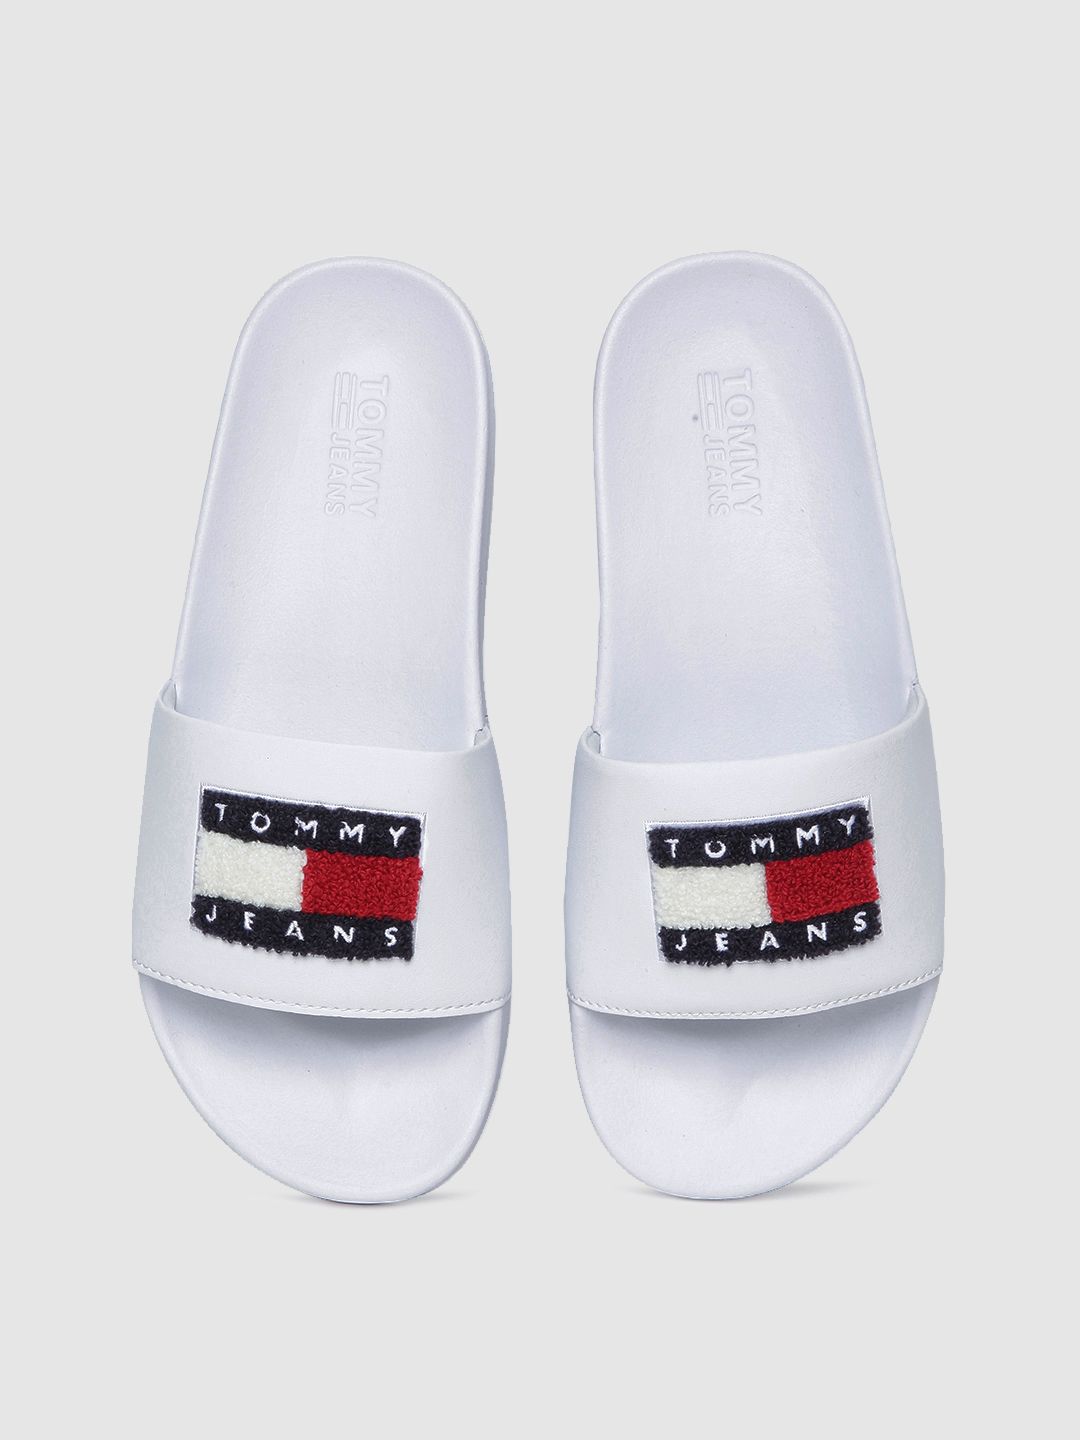 Tommy Hilfiger Women White Woven Design Flag Poolslide Sliders Price in India